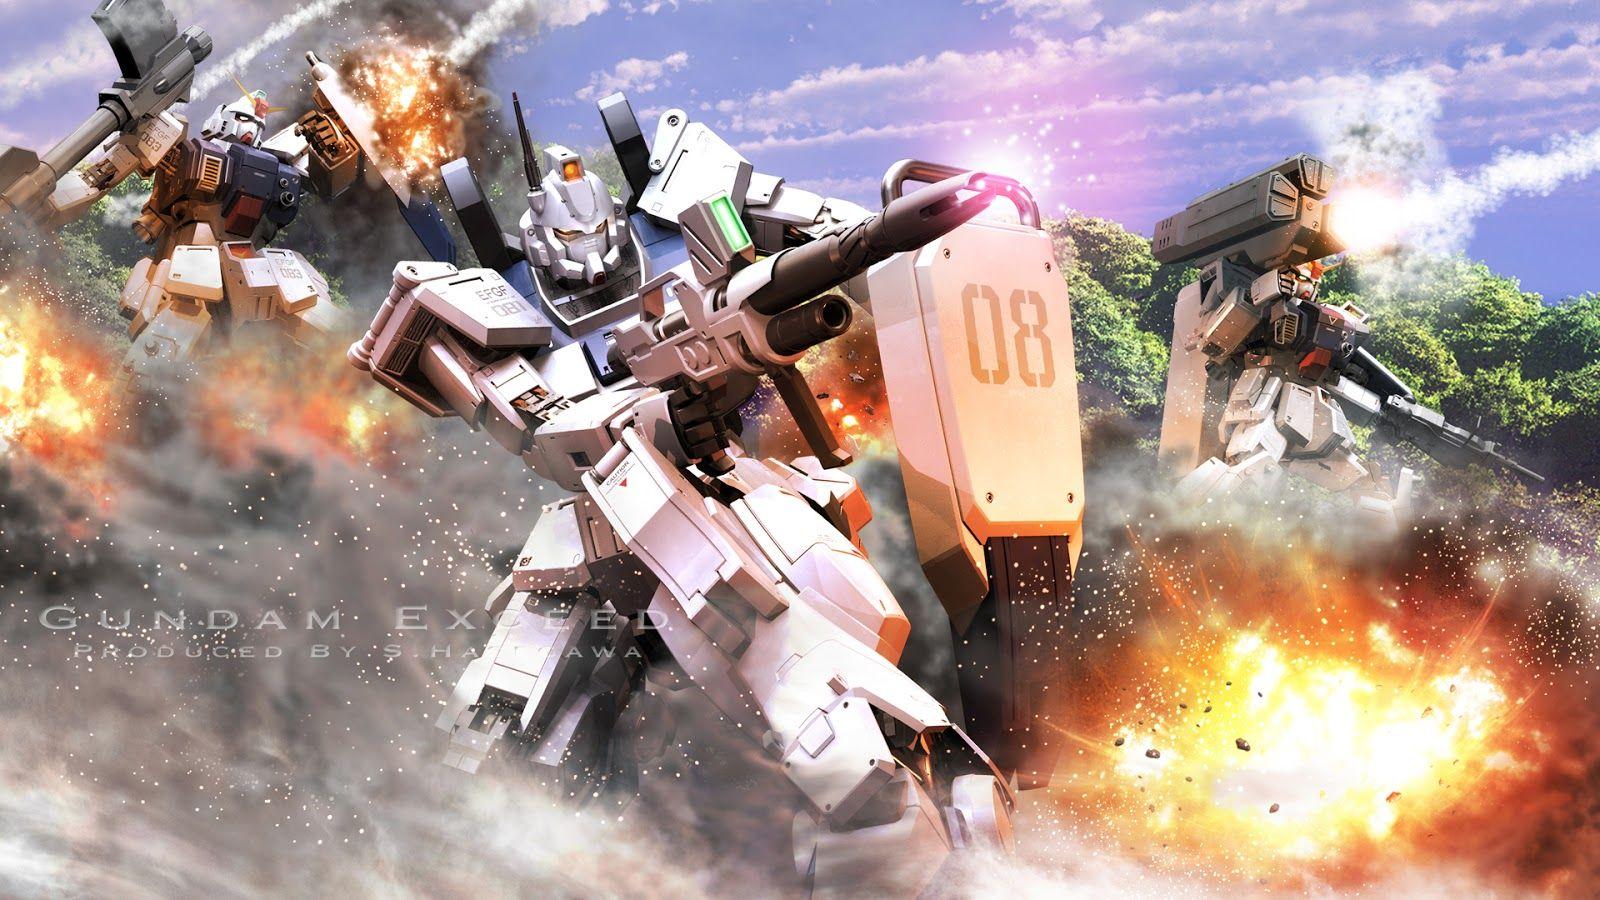 Gundam Exceed Wallpaper Image Gallery Kits Collection News